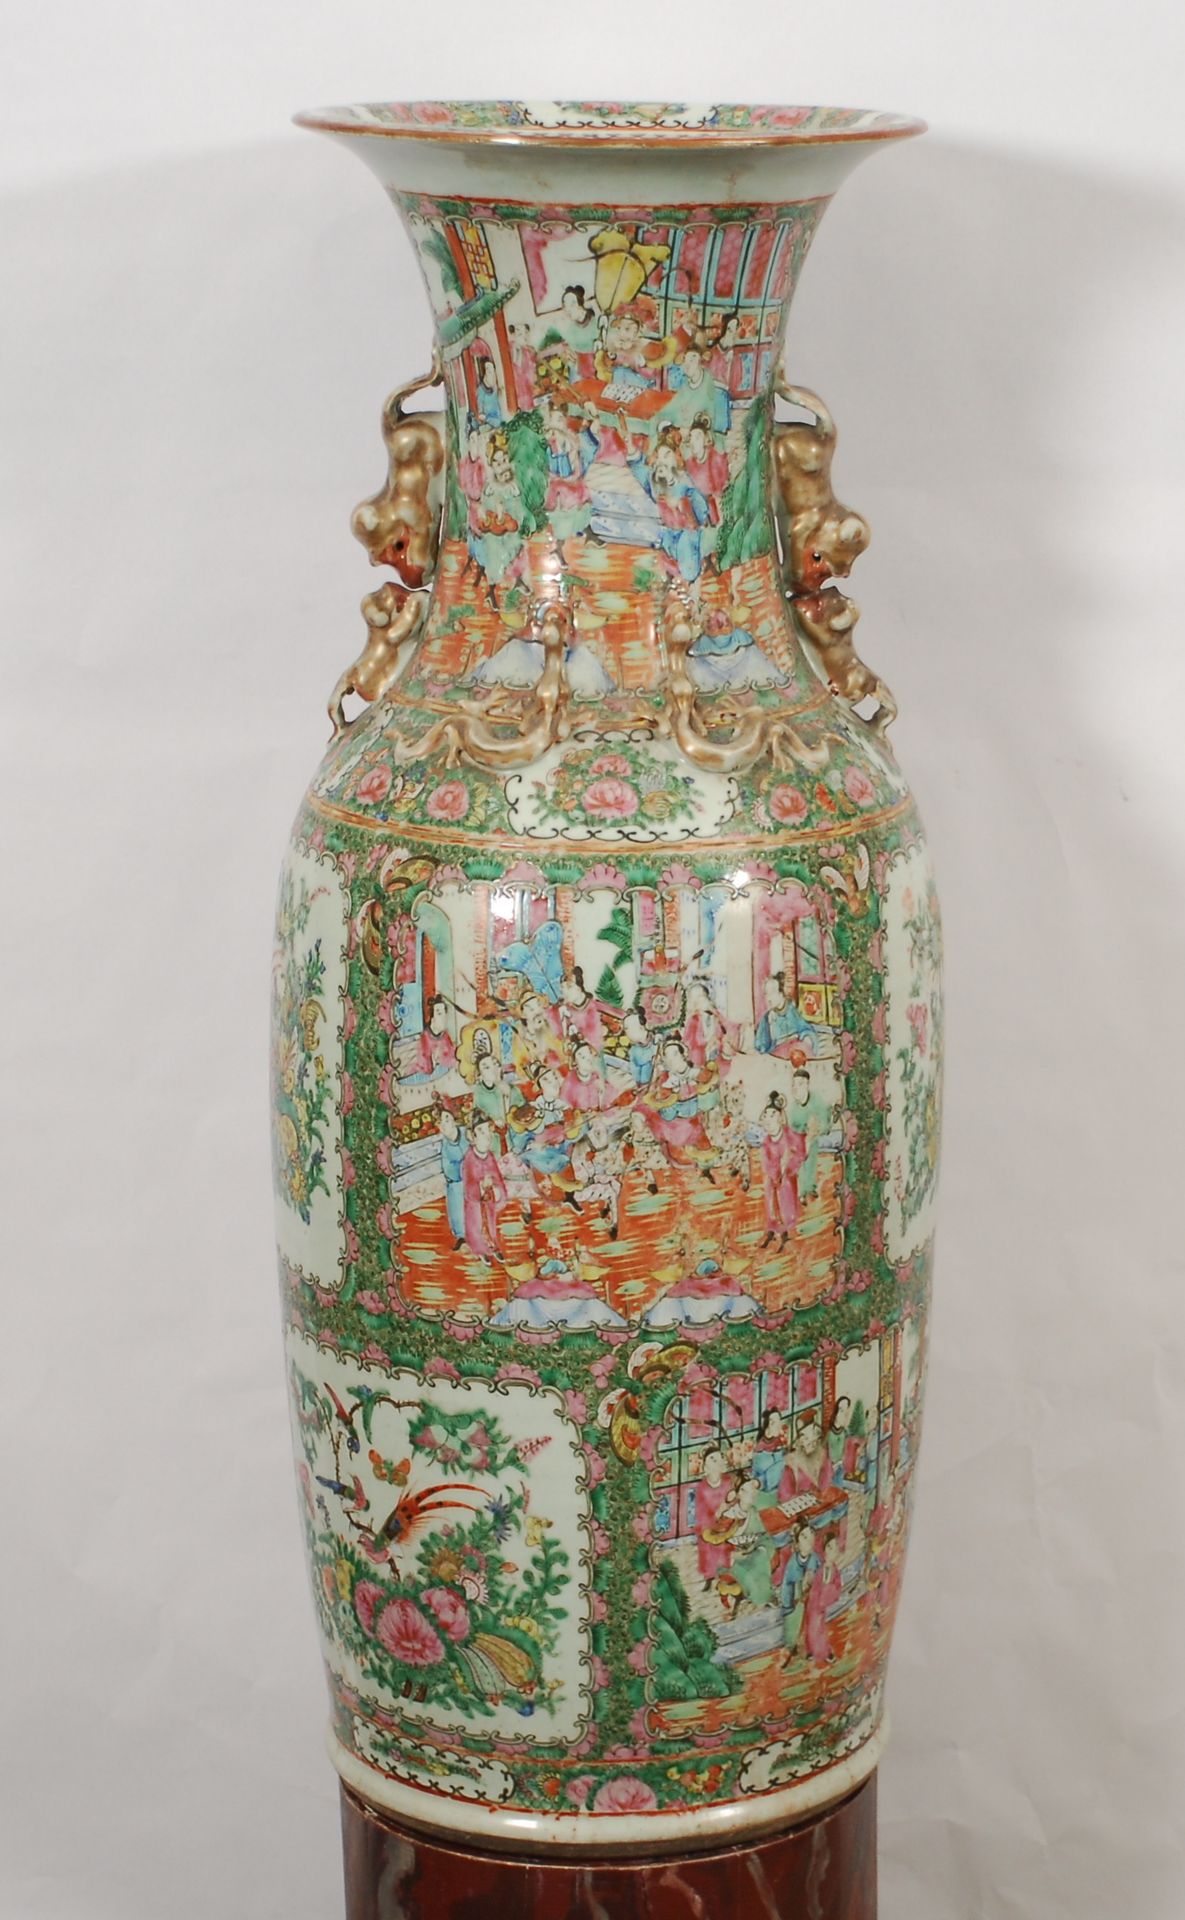 Null Large vase 
Polychrome decoration with gold highlights of palace scenes and&hellip;